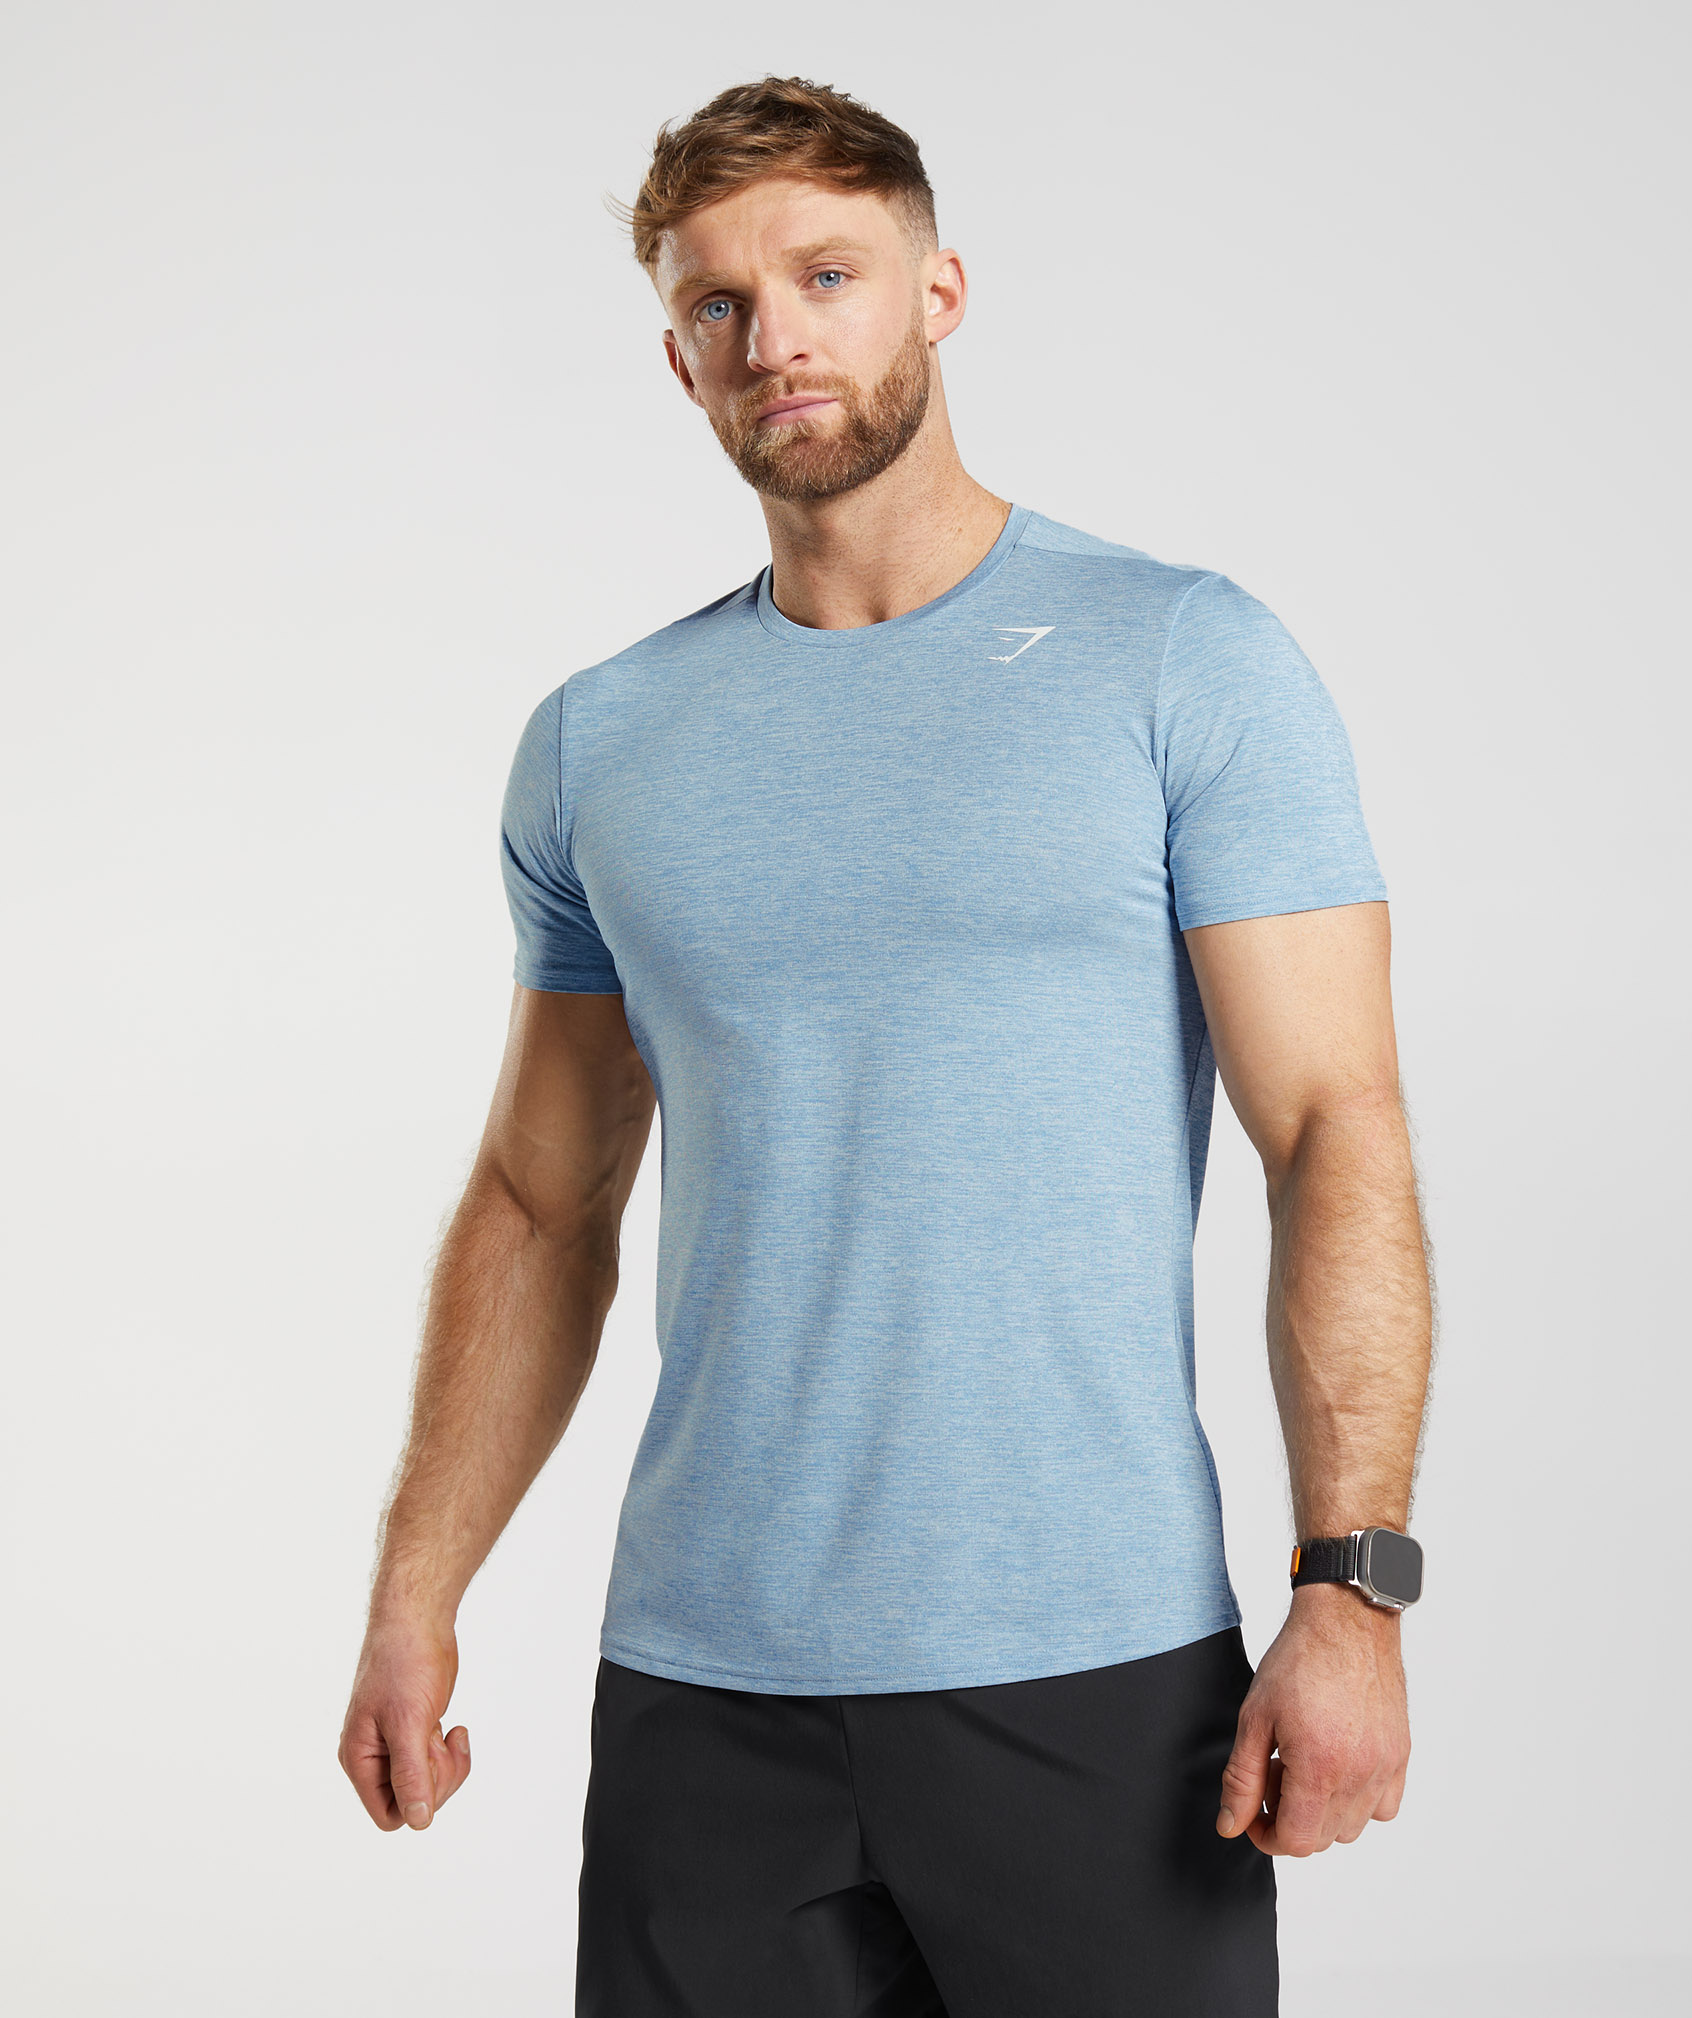 Wholesale Seamless Dri-Fit Full Sleeve Shirts From Gym Clothes